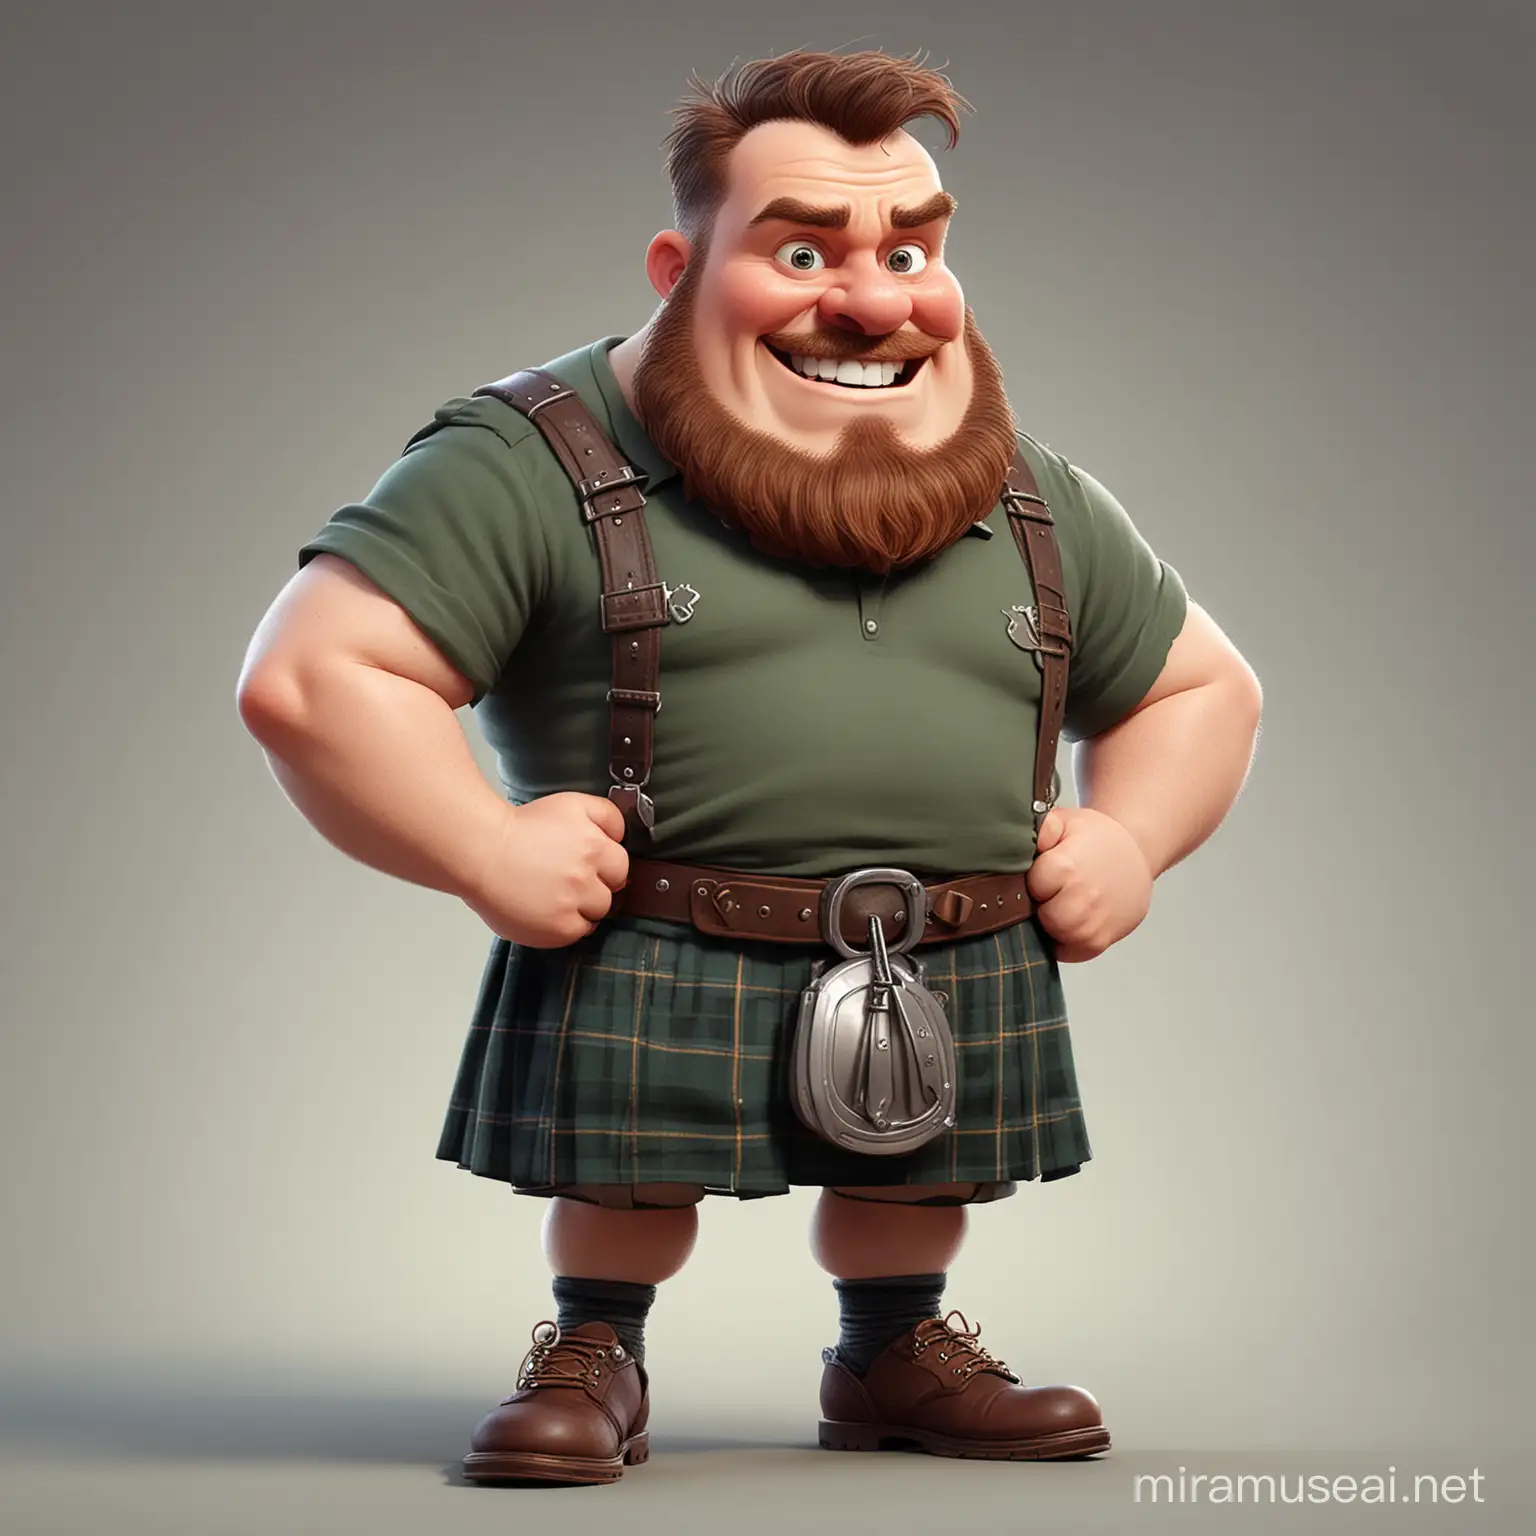 A wee heavy scottish guy, in cartoon style